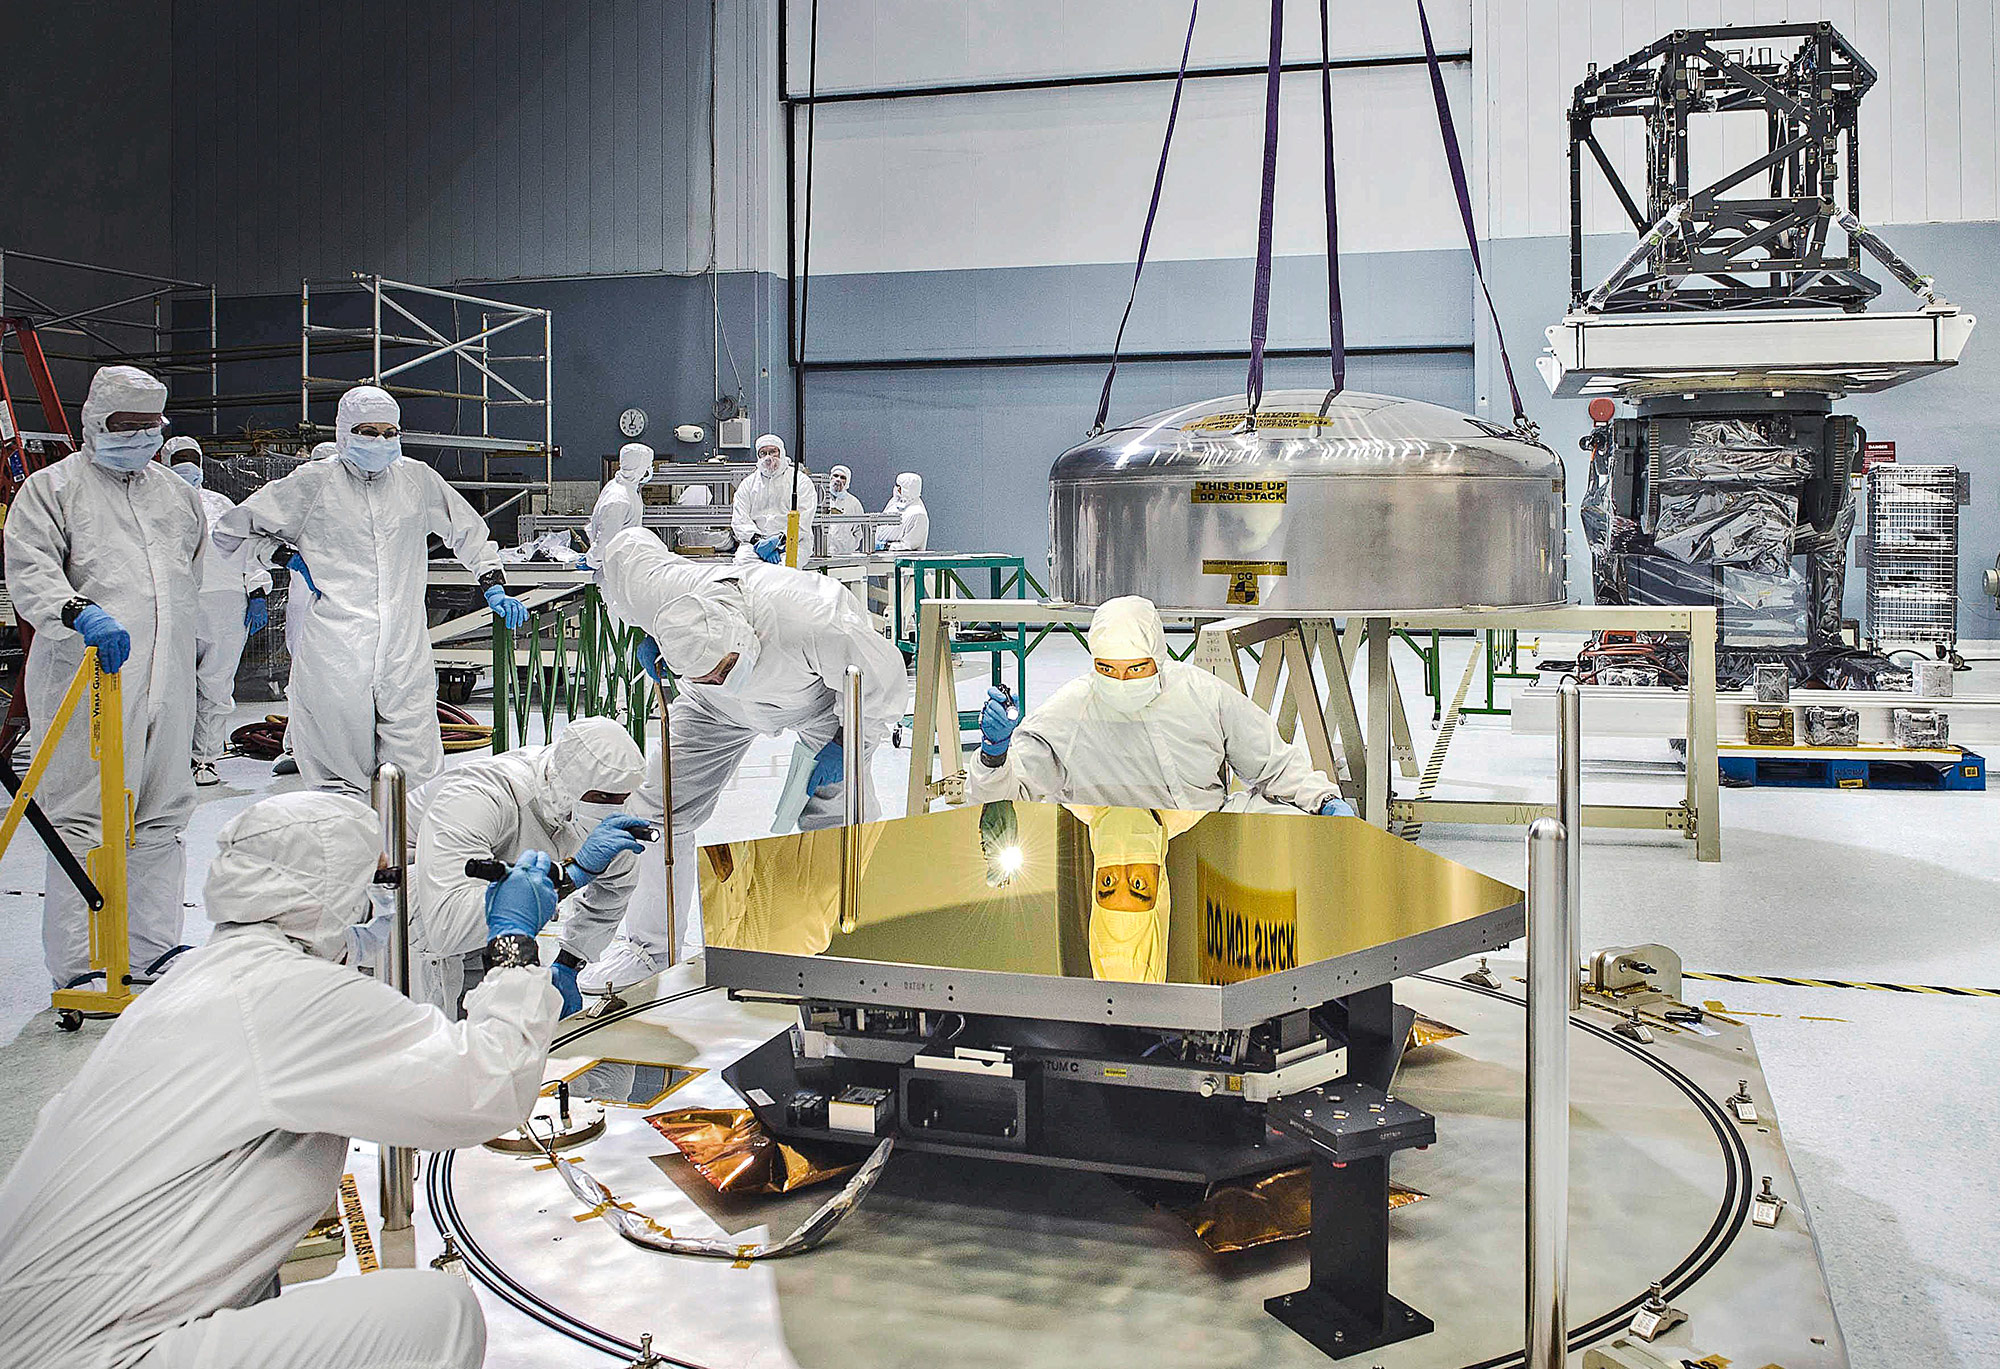 A team of scientists in a large room look at a gold mirror for the James Webb Space Telescope.